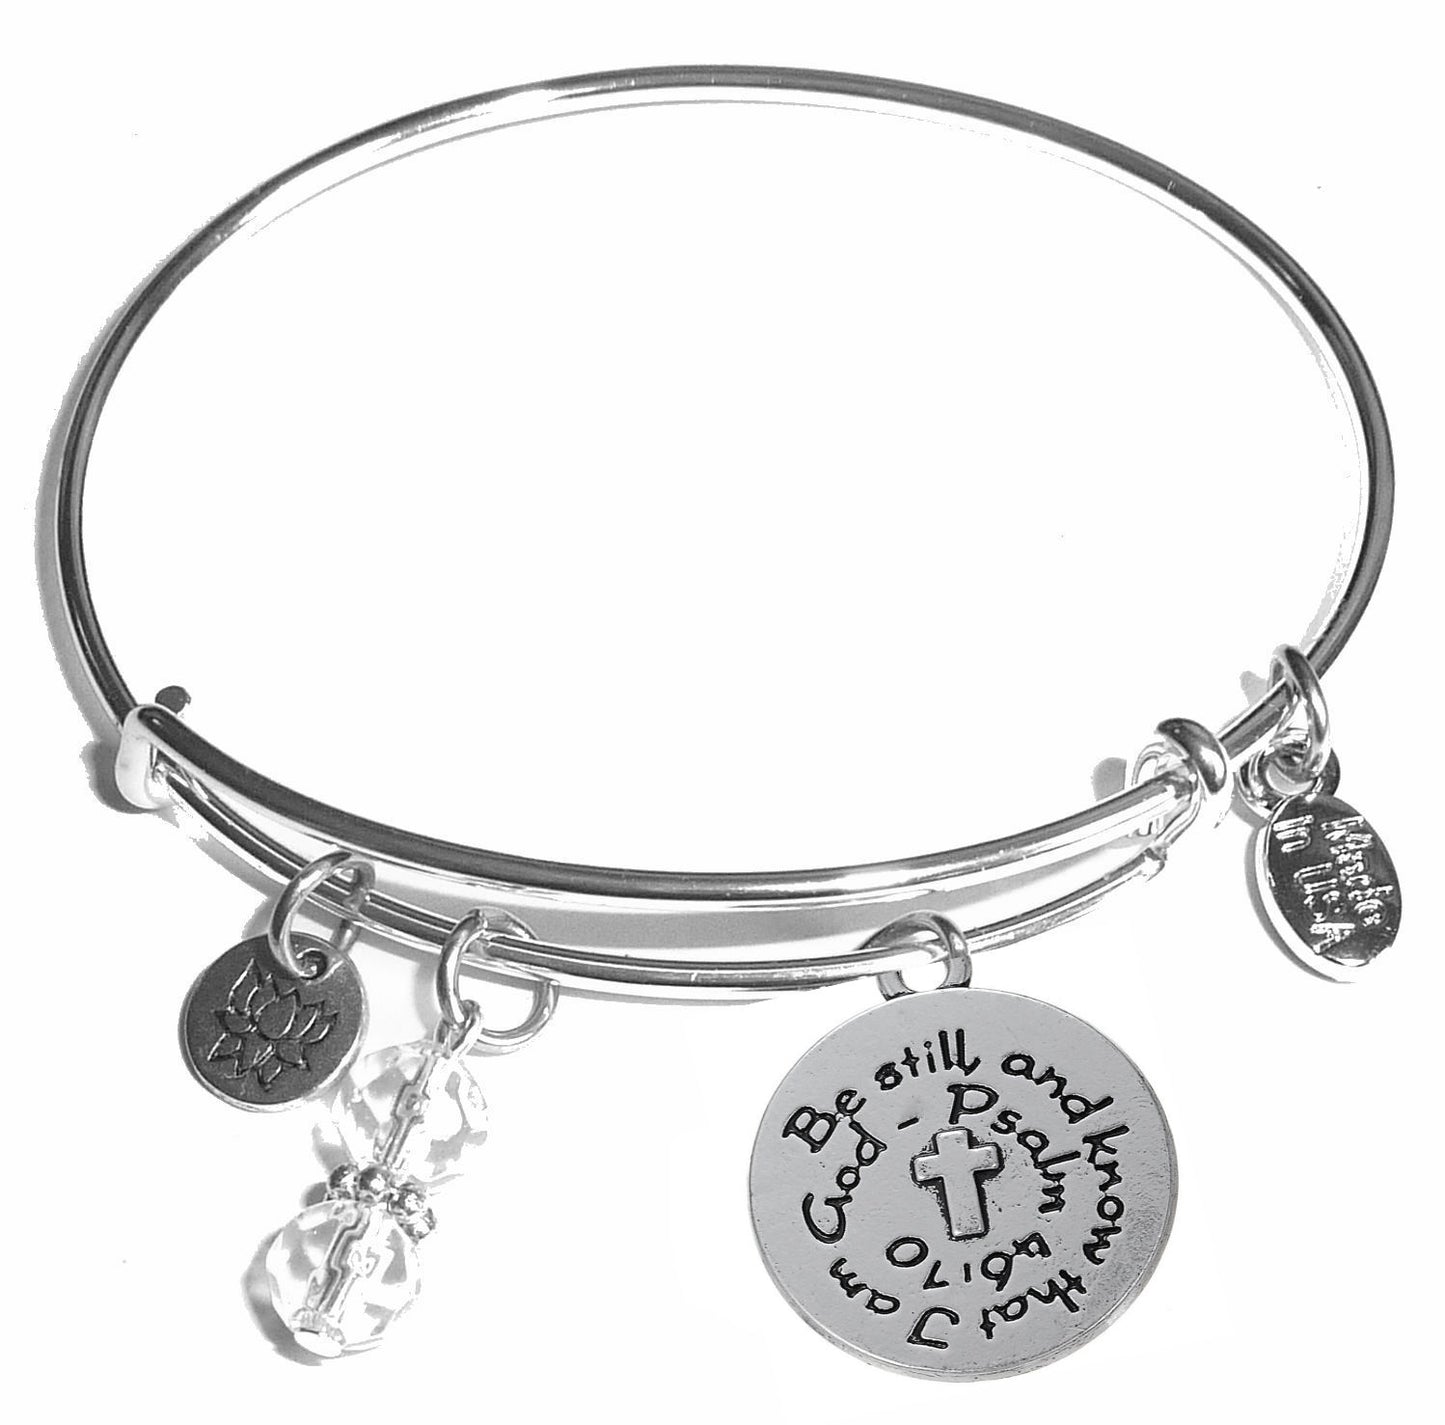 Be Still and Know that I am God- Message Bangle Bracelet - Expandable Wire Bracelet– Comes in a gift box